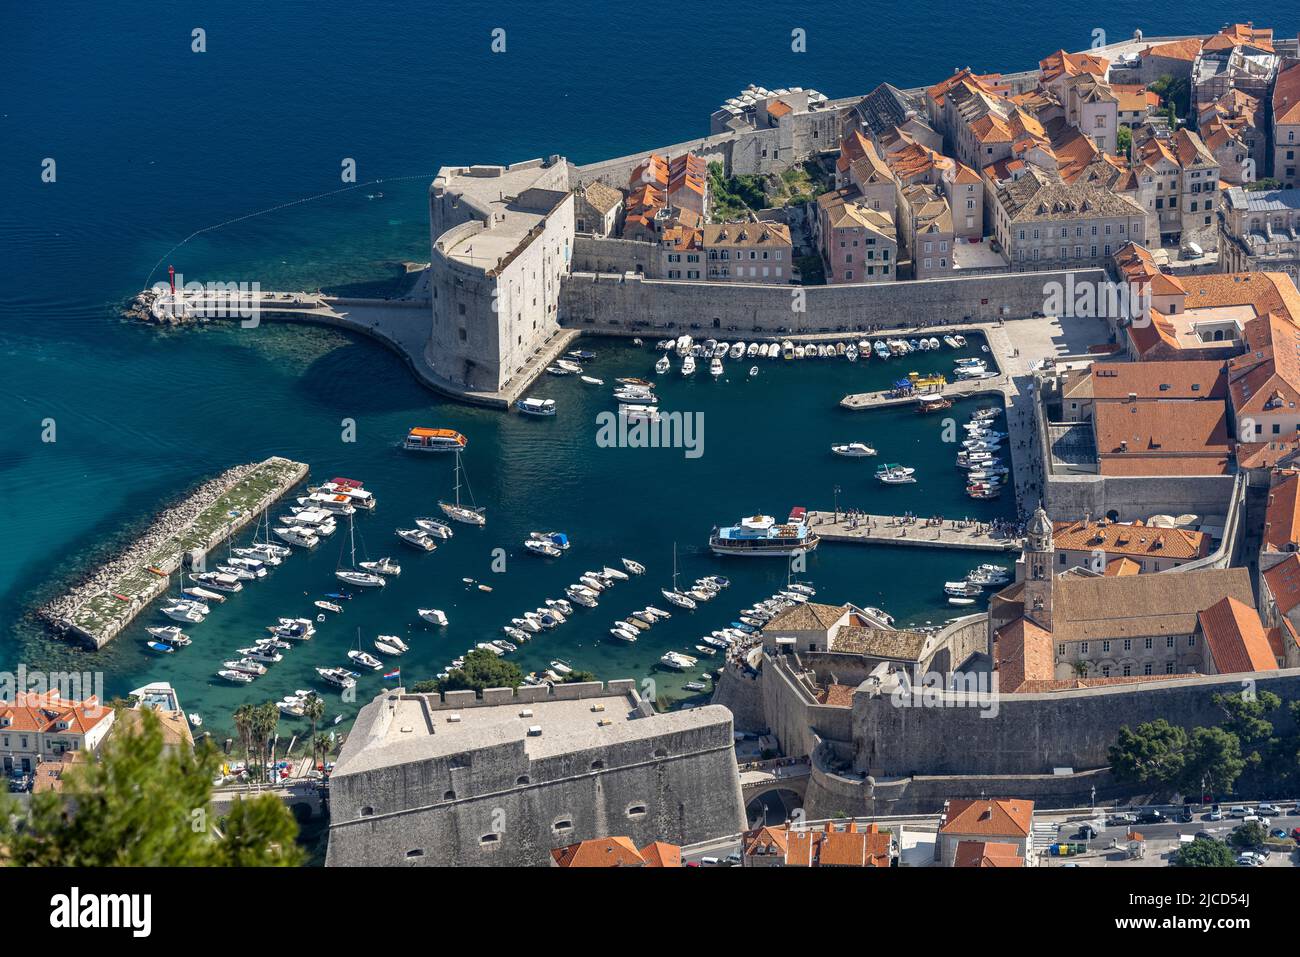 View of Harbor of Old Town from Srd Cable Car Viewpoint, Dubrovnik, Croatia Stock Photo